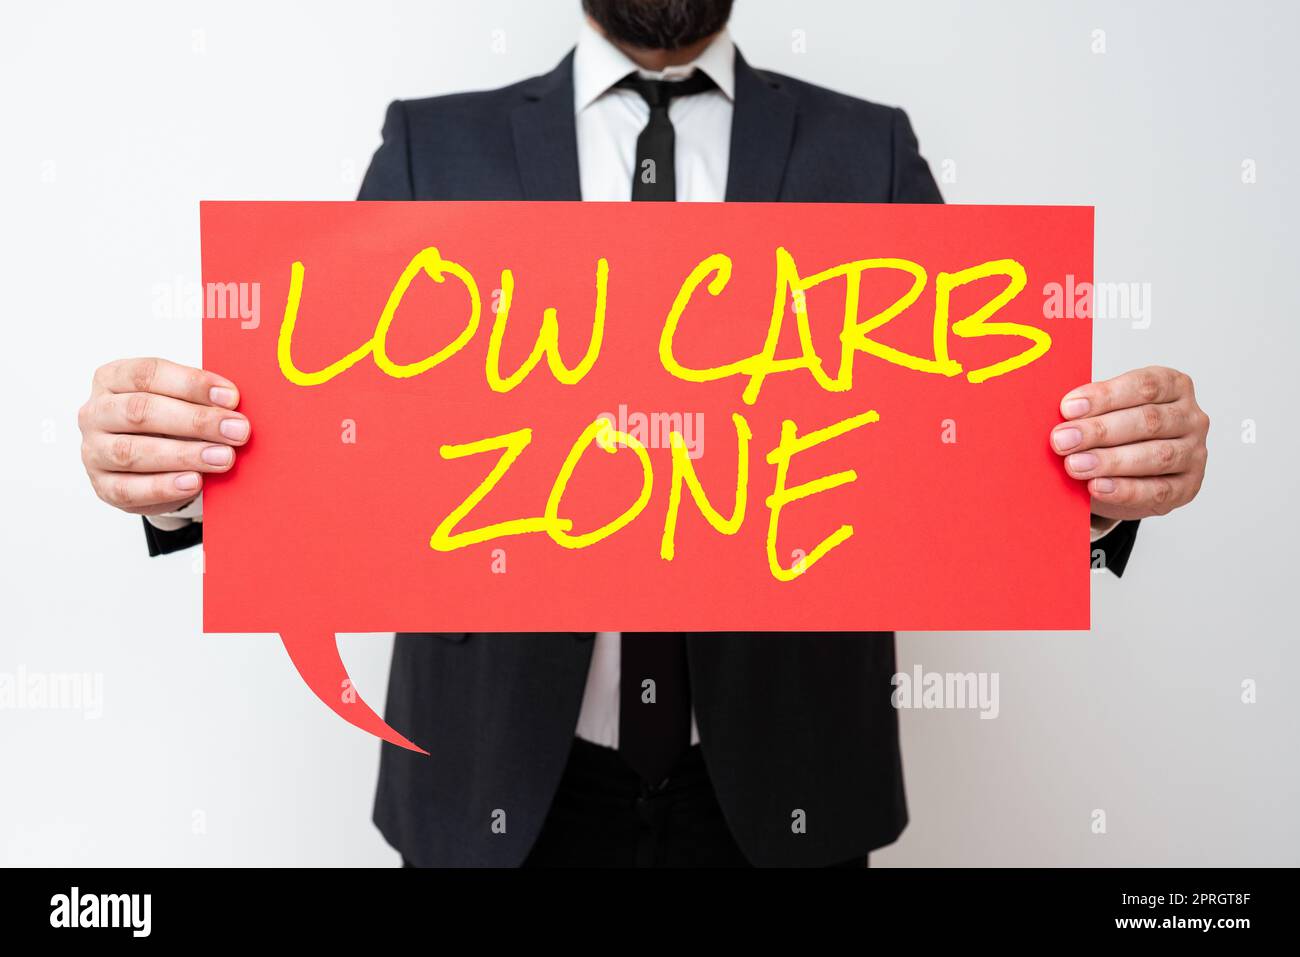 Conceptual display Low Carb Zone. Business concept Healthy diet for losing weight eating more proteins sugar free Businessman Holding Speech Bubble With Important Informations. Stock Photo